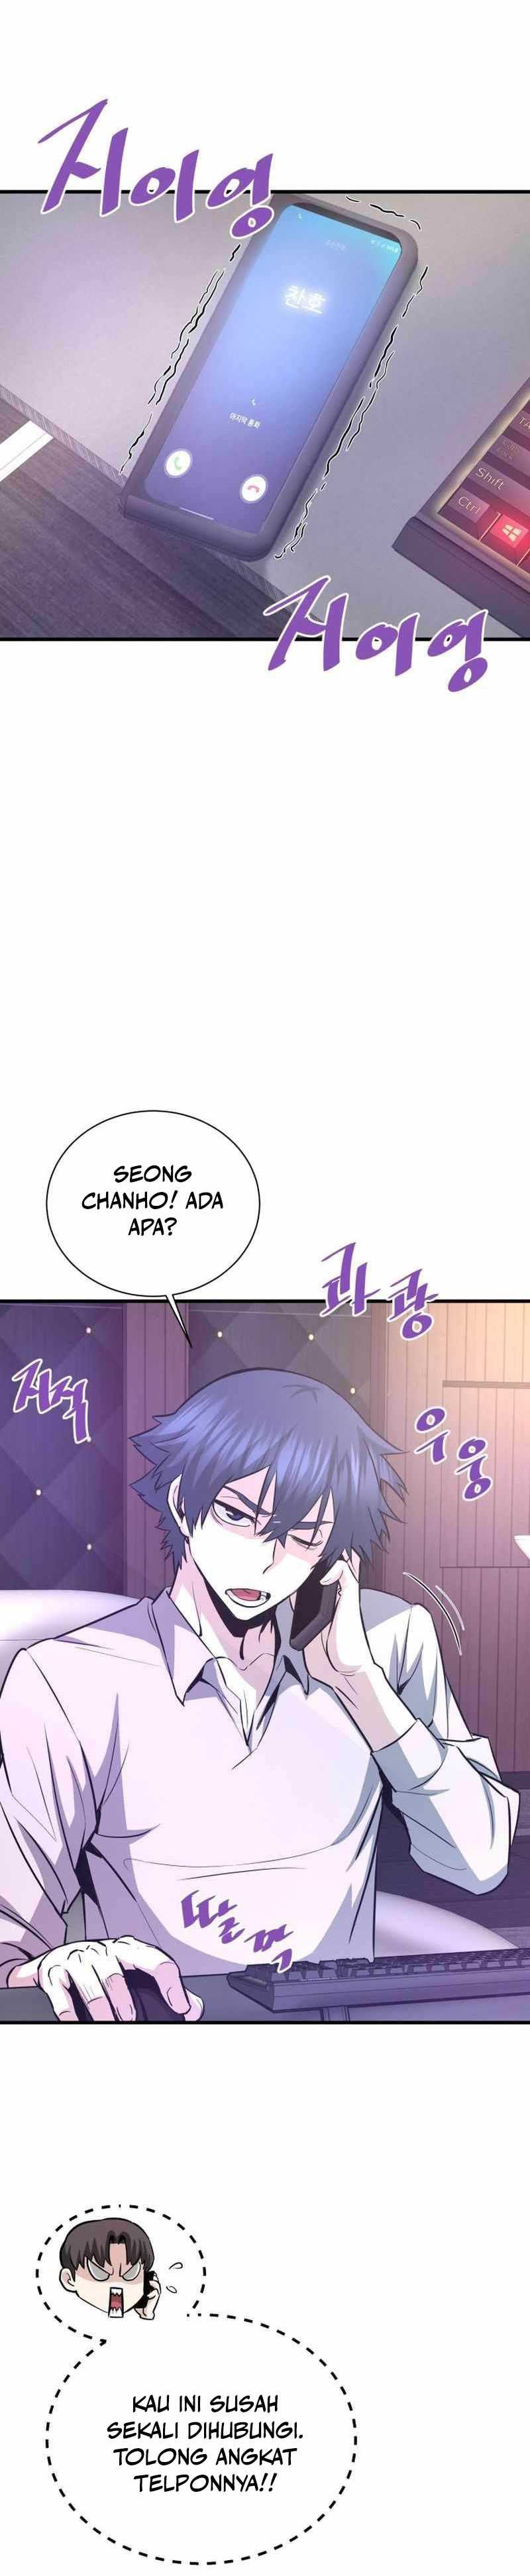 Han Dae Sung Returned From Hell Chapter 54 18